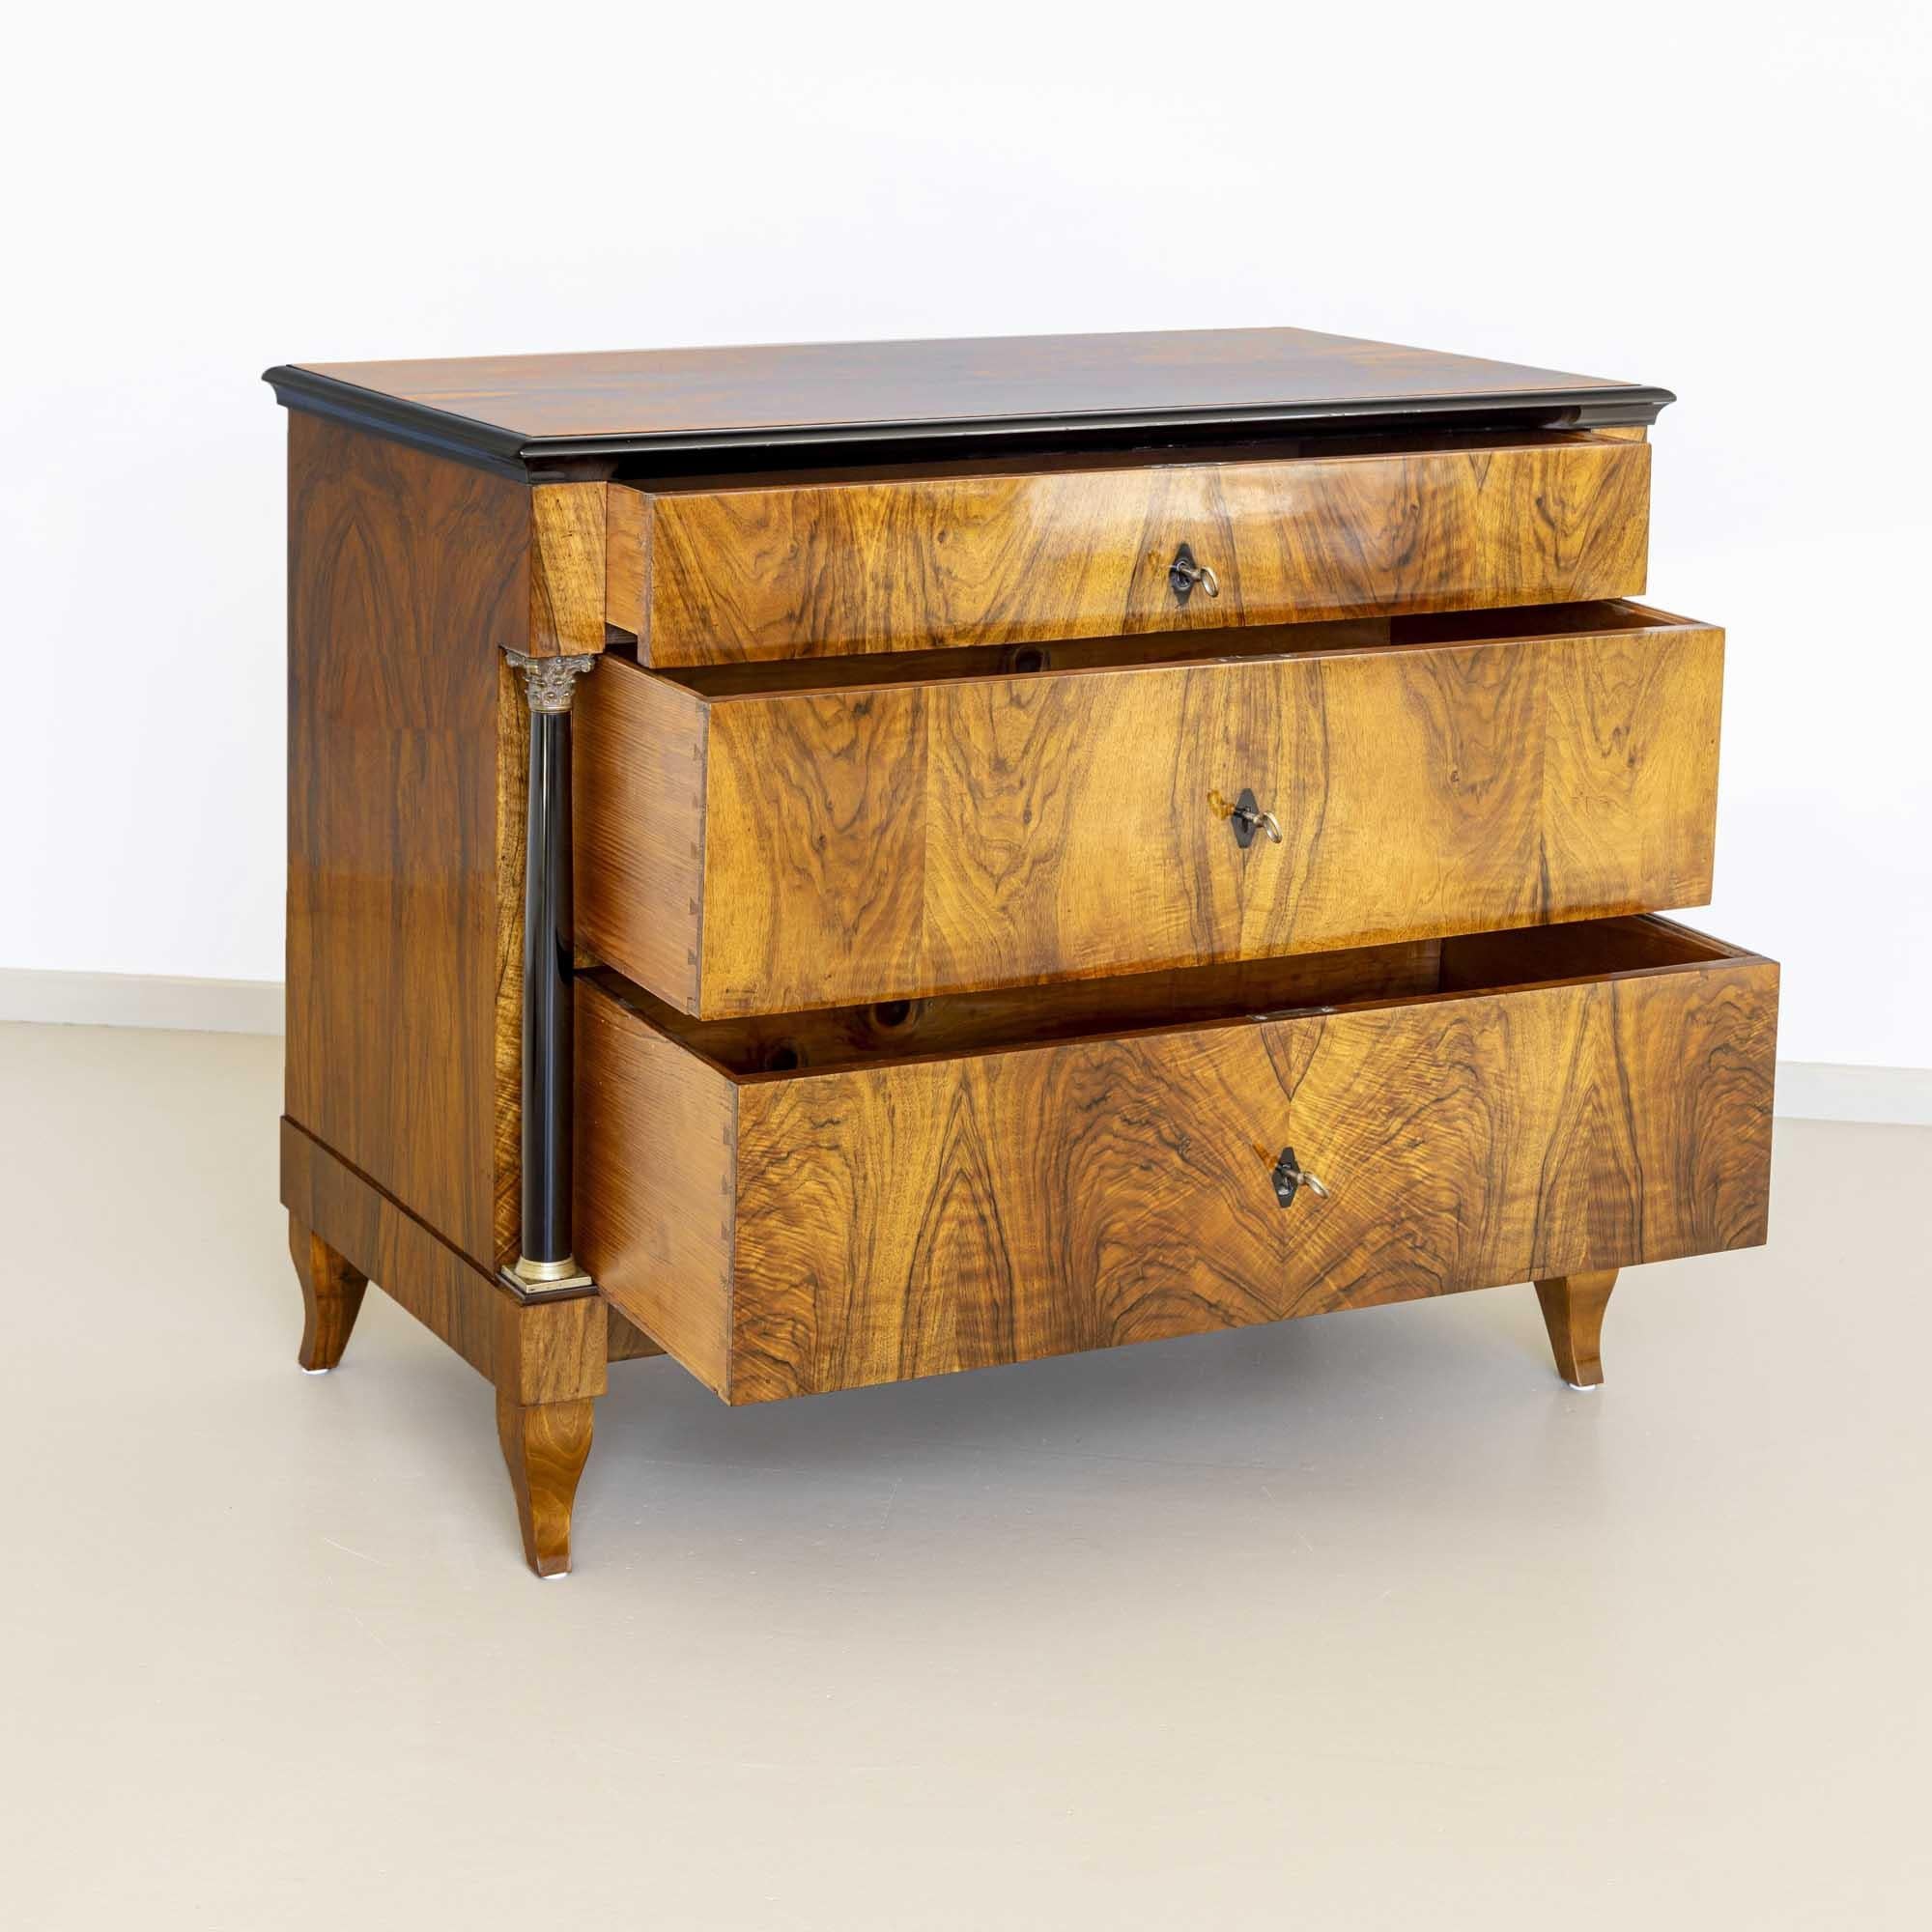 Biedermeier chest of drawers on S-shaped legs with ebonized columns, bases and brass capitals. The surrounding profiled edge is also ebonized. The chest of drawers offers plenty of storage space with three drawers. The chest of drawers is veneered